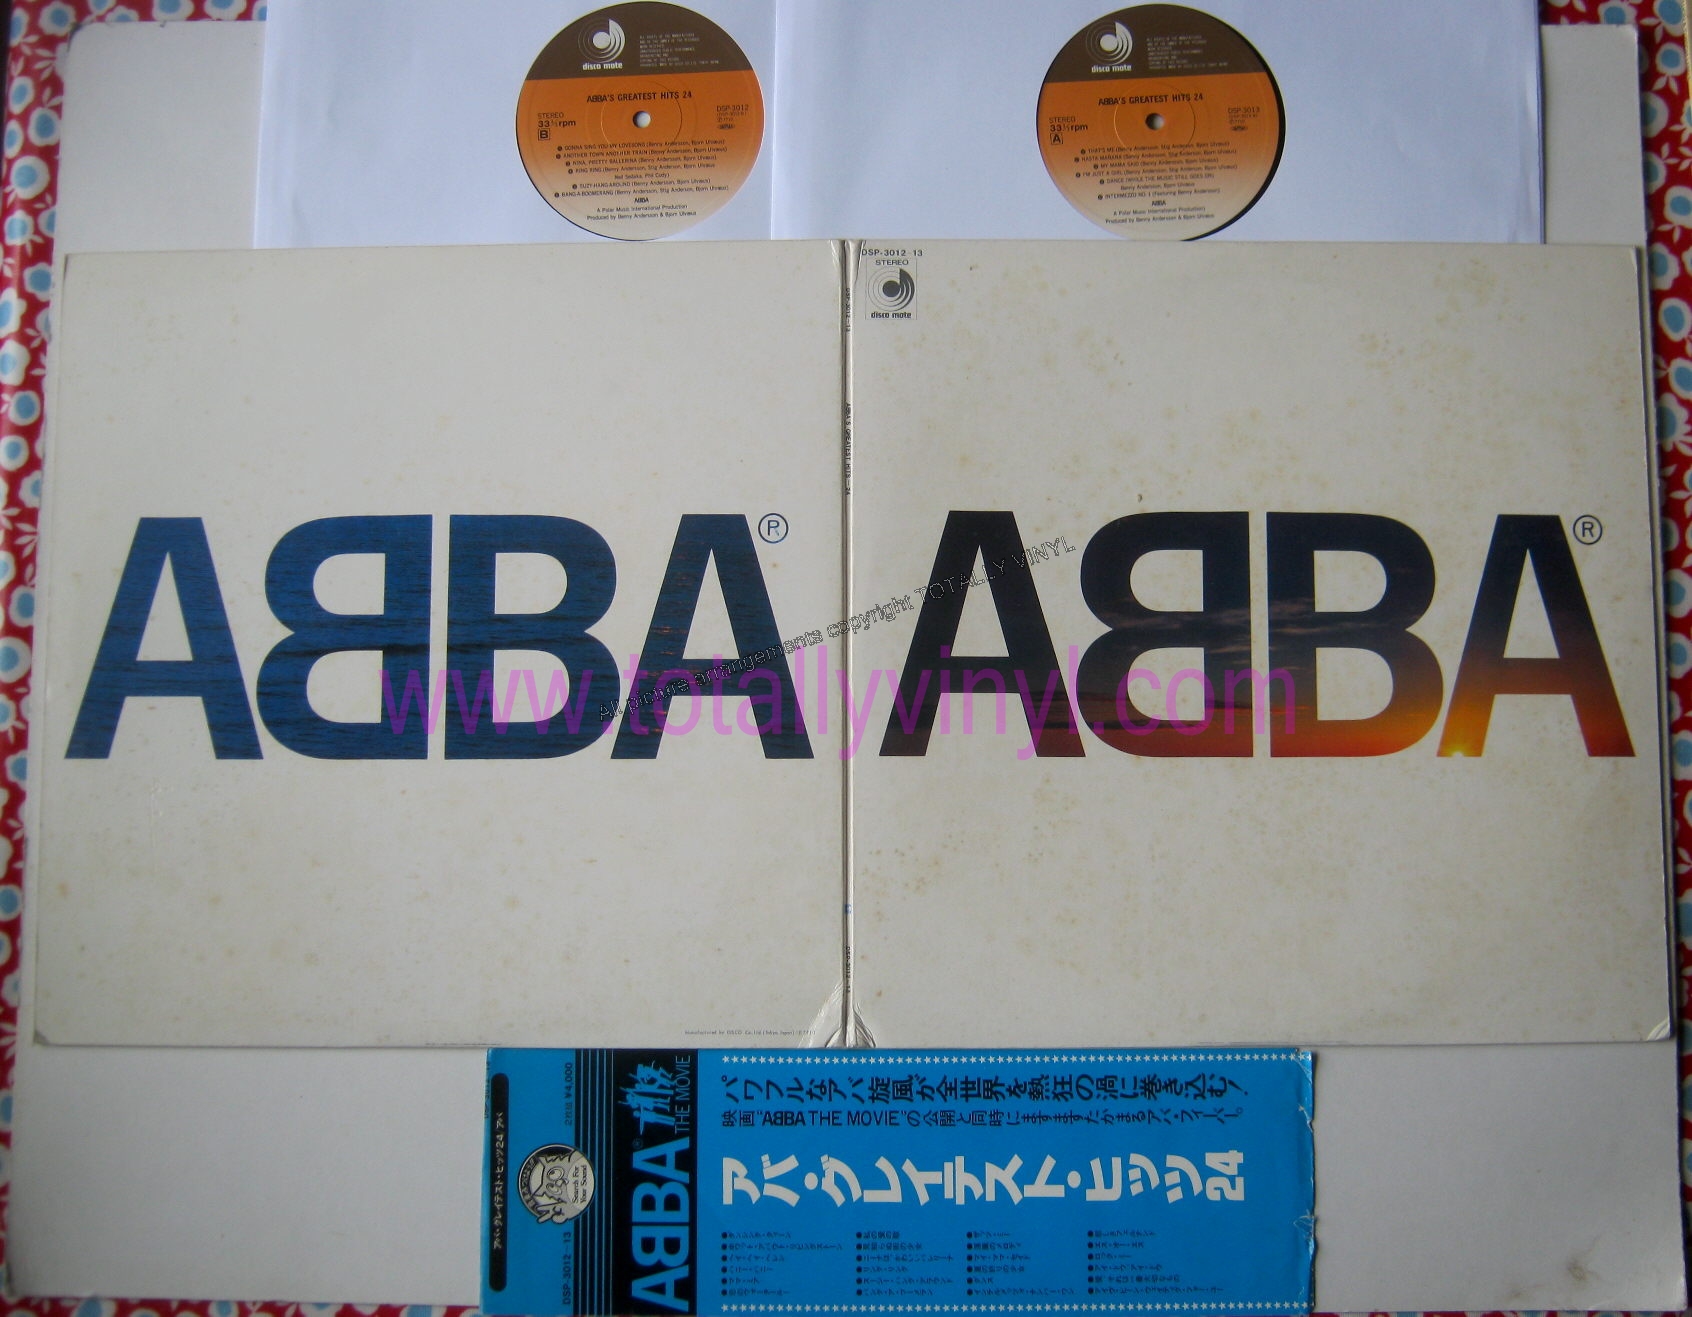 Totally Vinyl Records || Abba - Abba's greatest hits-24 LP LP x 2 Special  Cover